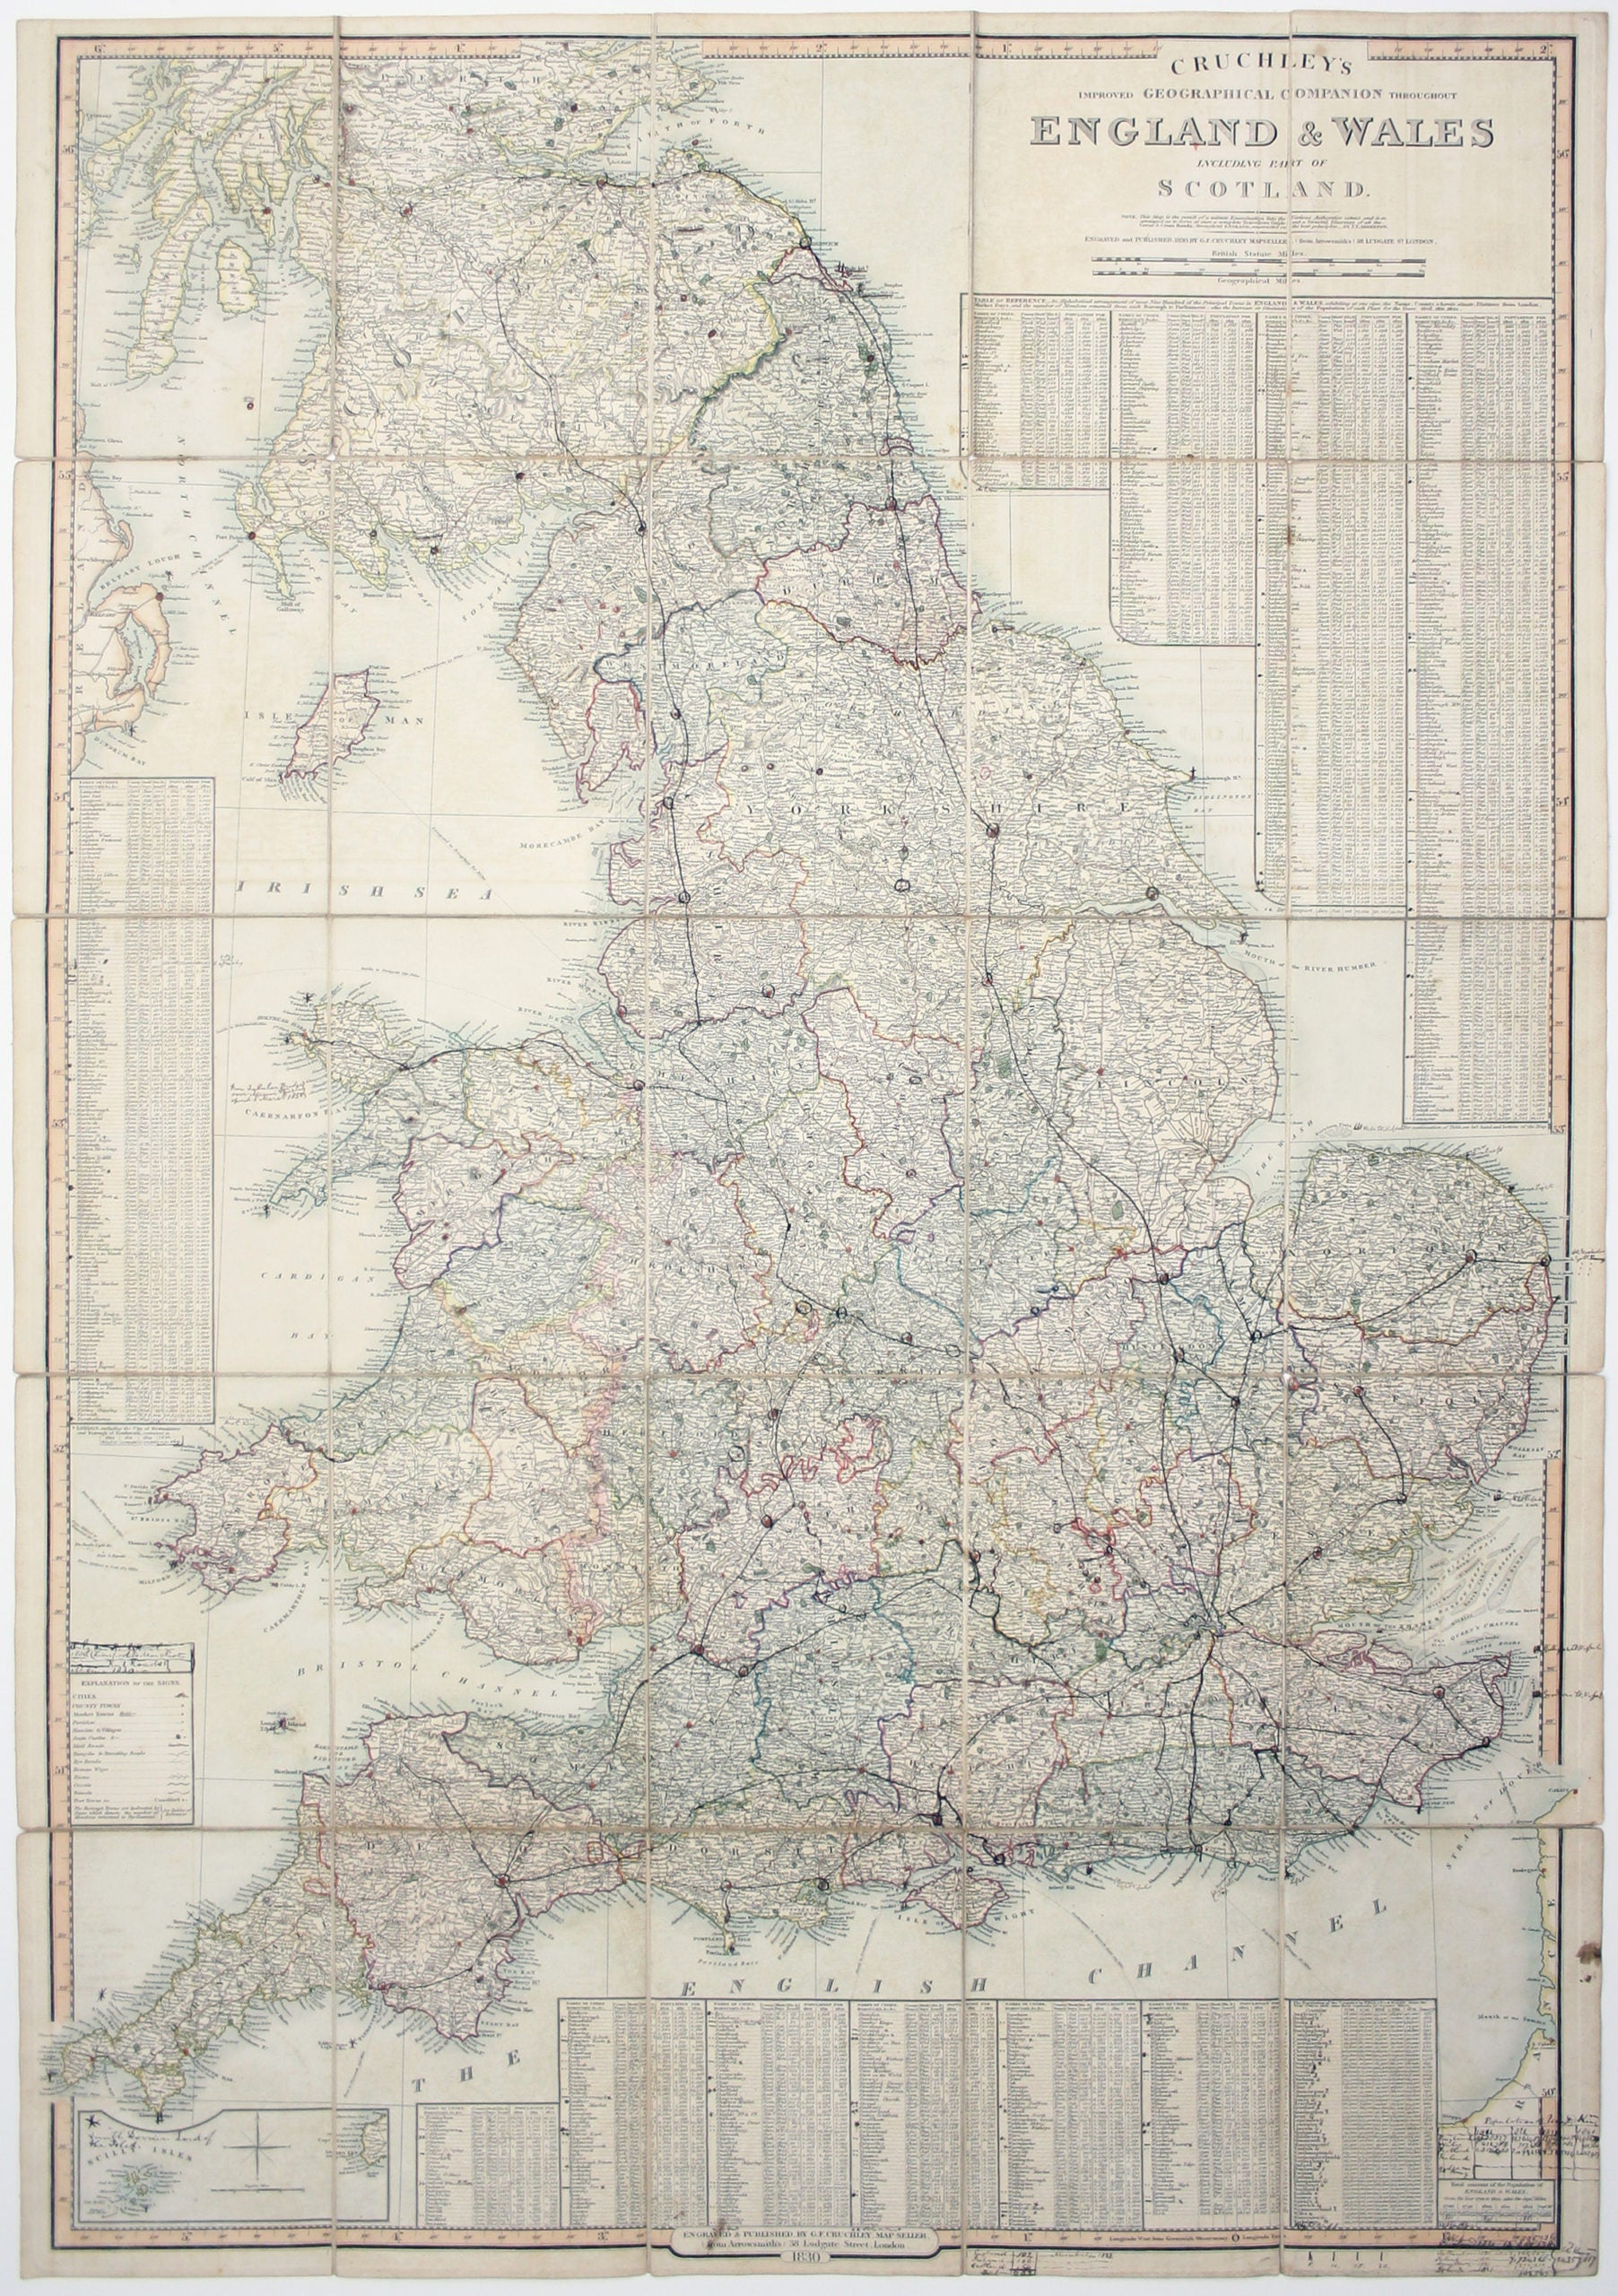 Cruchley’s Map of England & Wales, Annotated